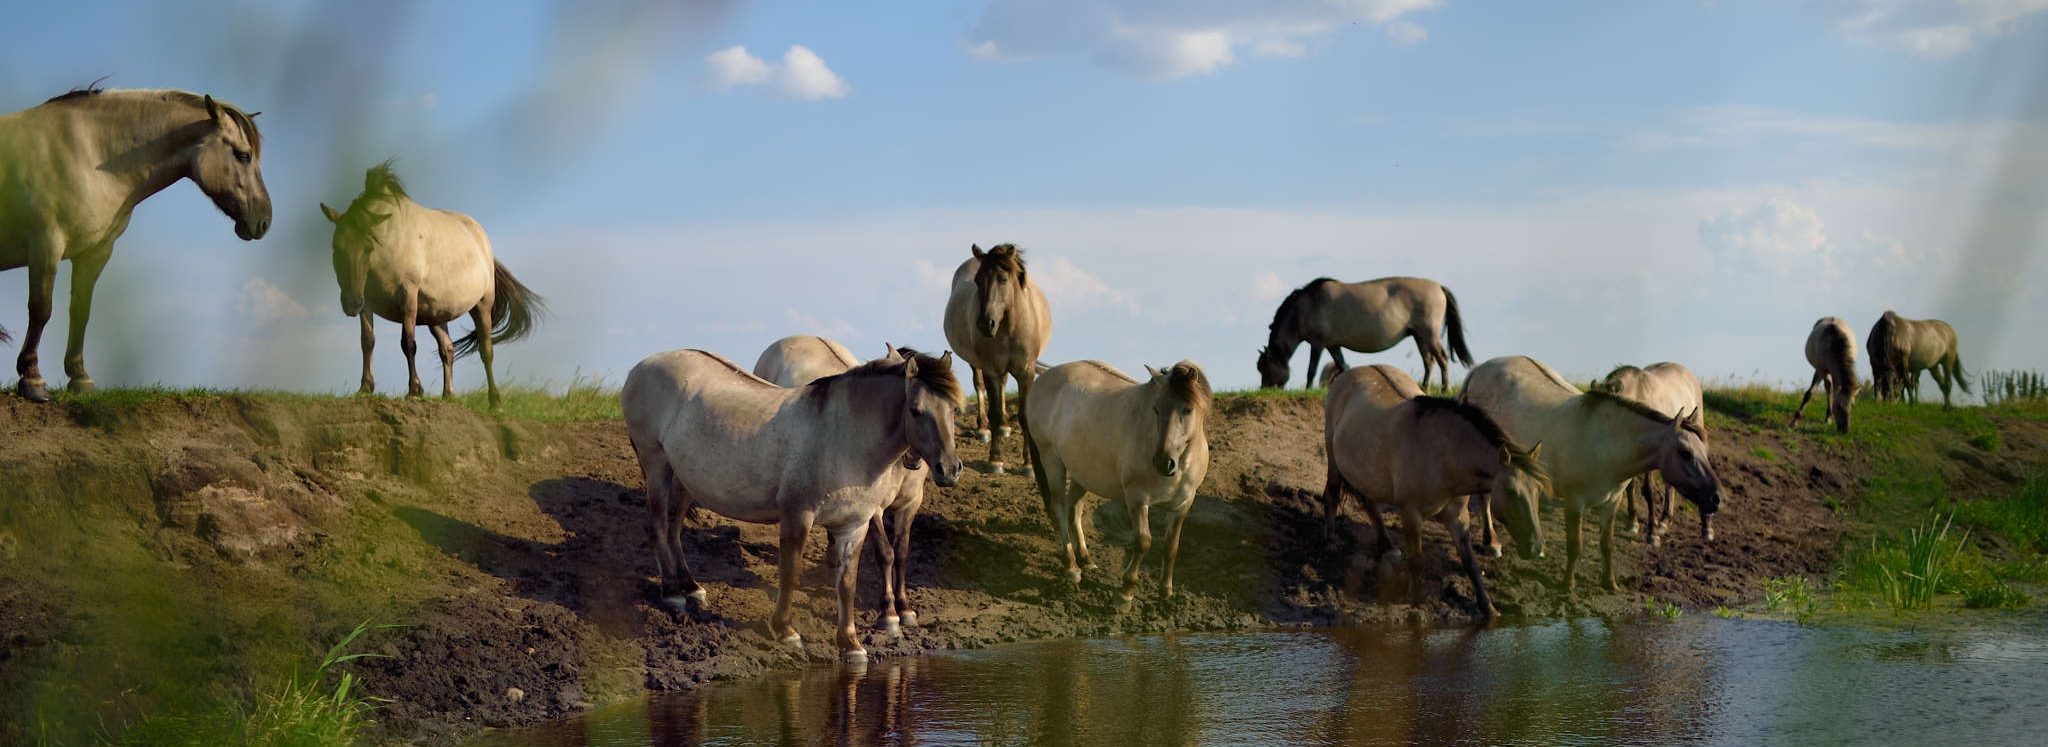 The sturdy Koniks, which lived over 20 years in the wild in Latvia, are well-suited to life in the Danube Delta. 